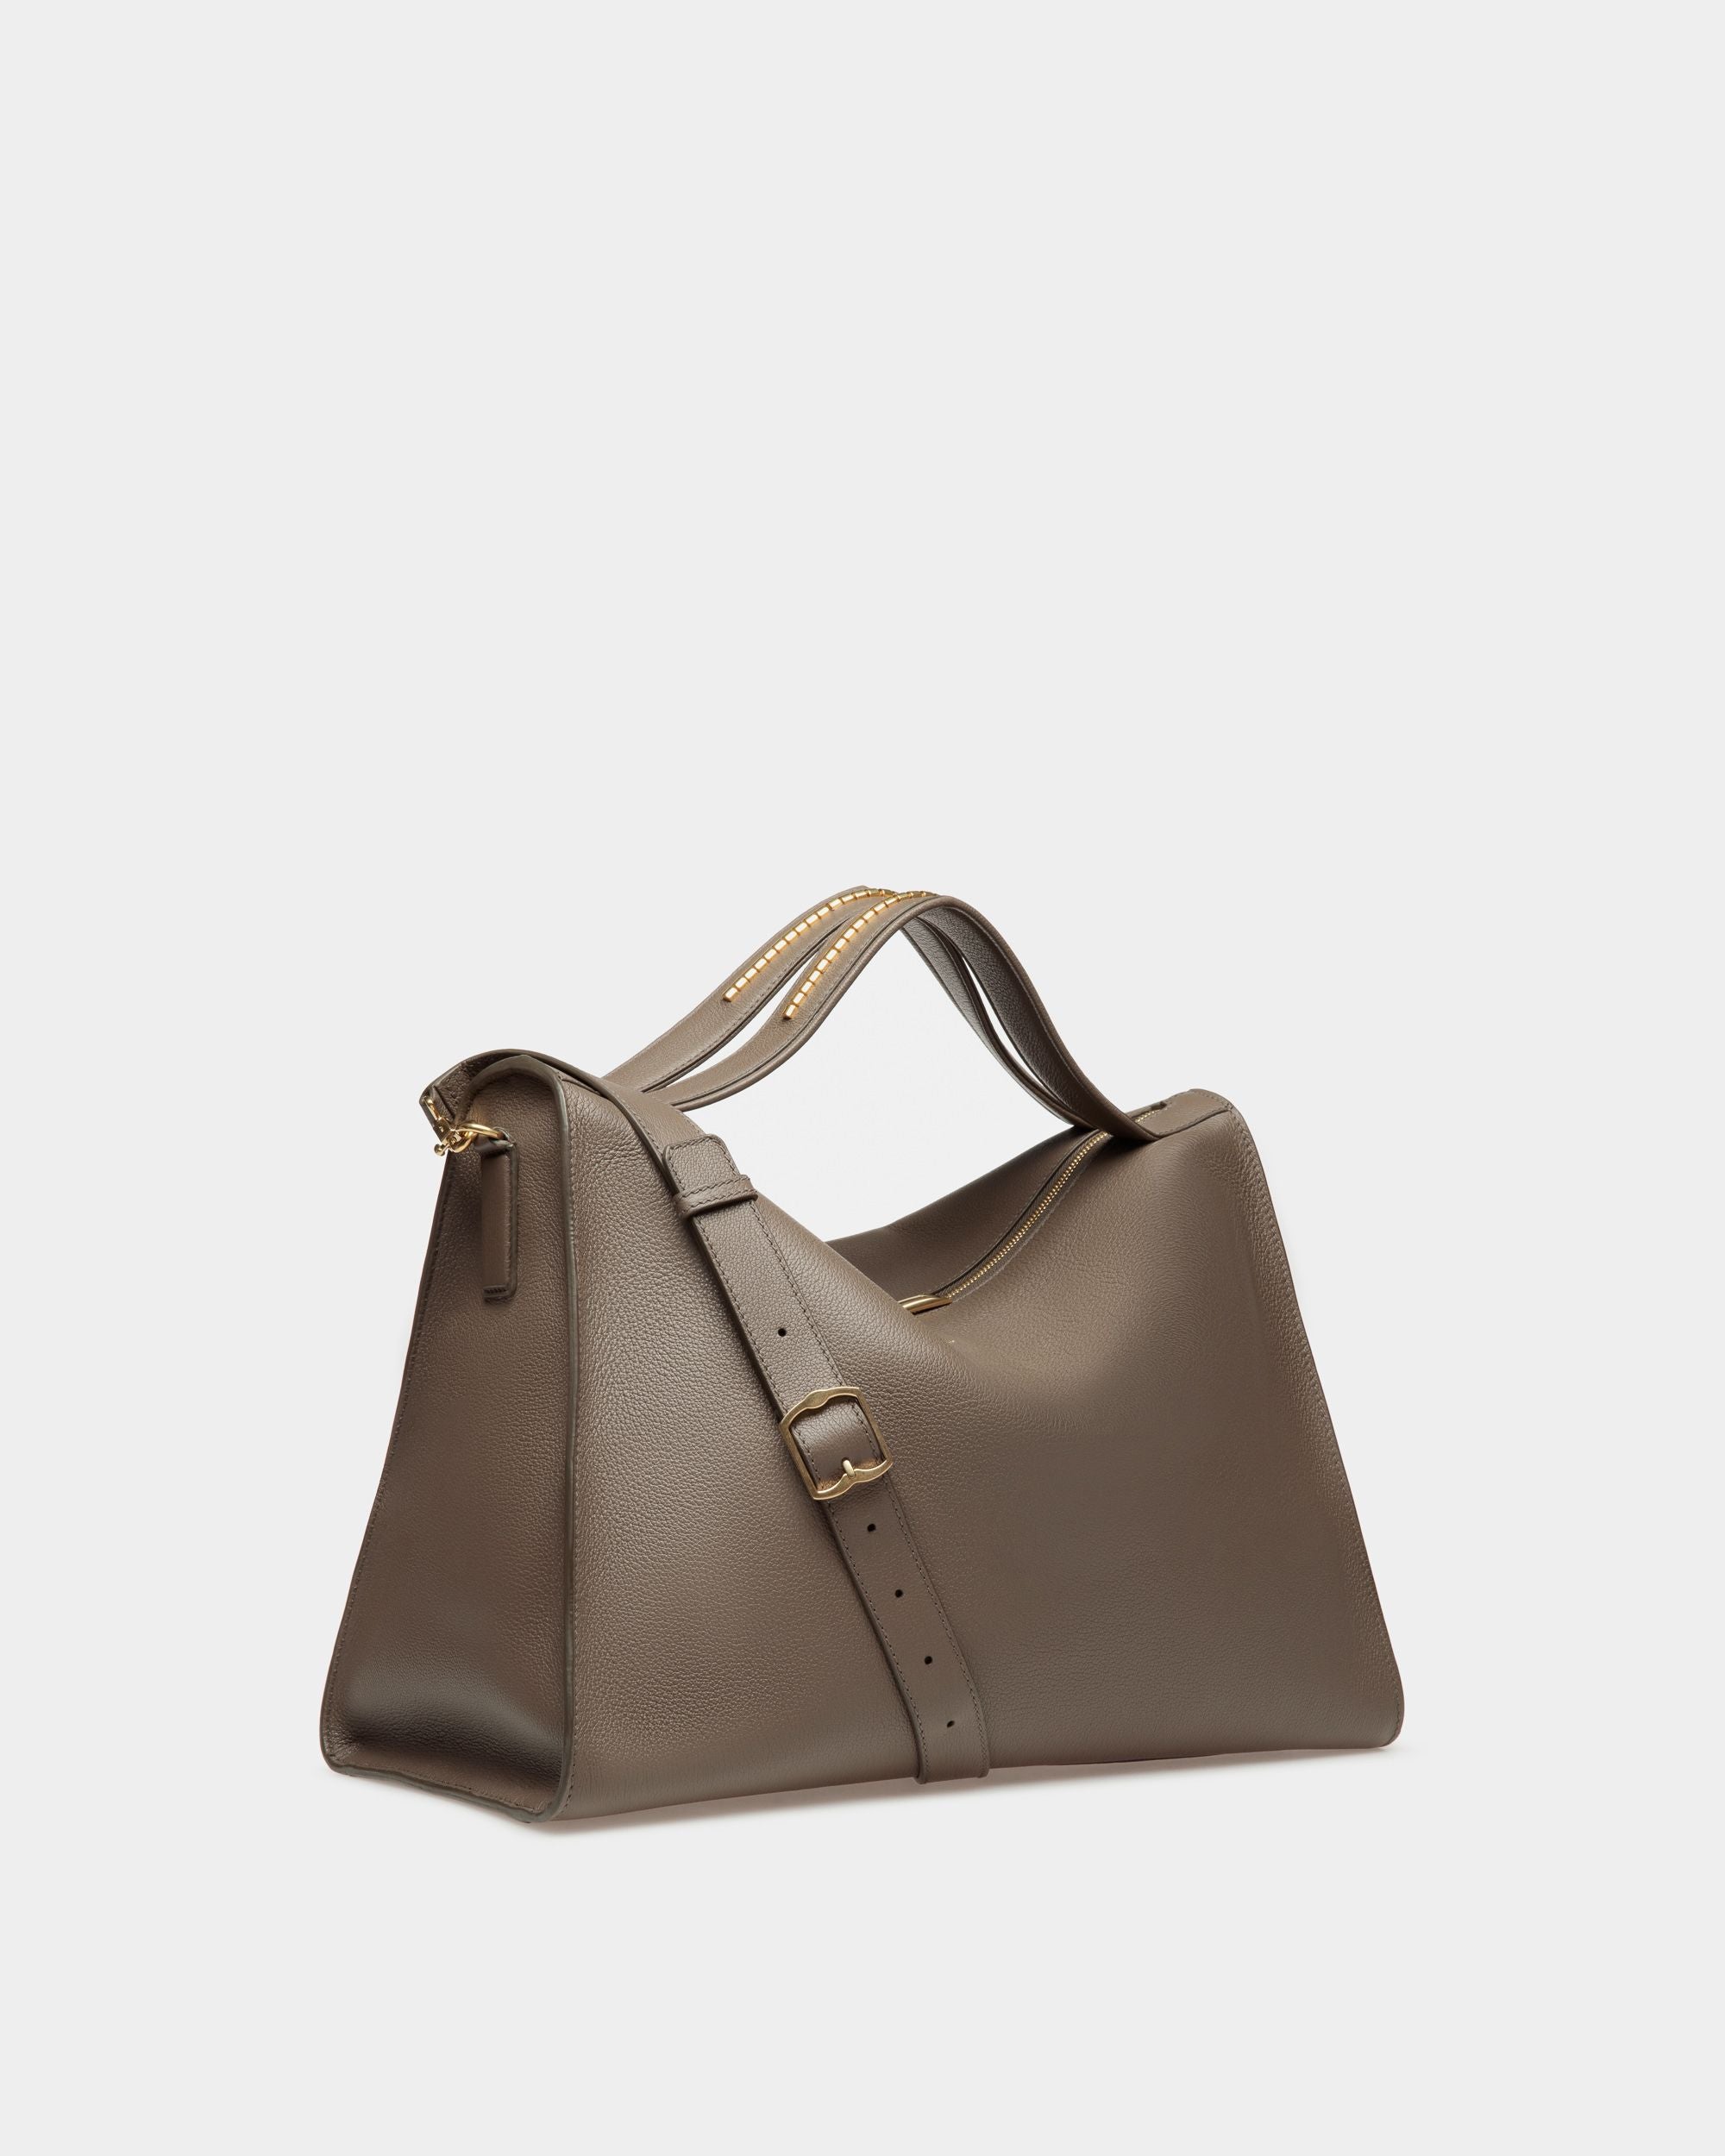 Arkle Soft Tote Bag | Men's Tote Bag |Grey Leather | Bally | Still Life 3/4 Front